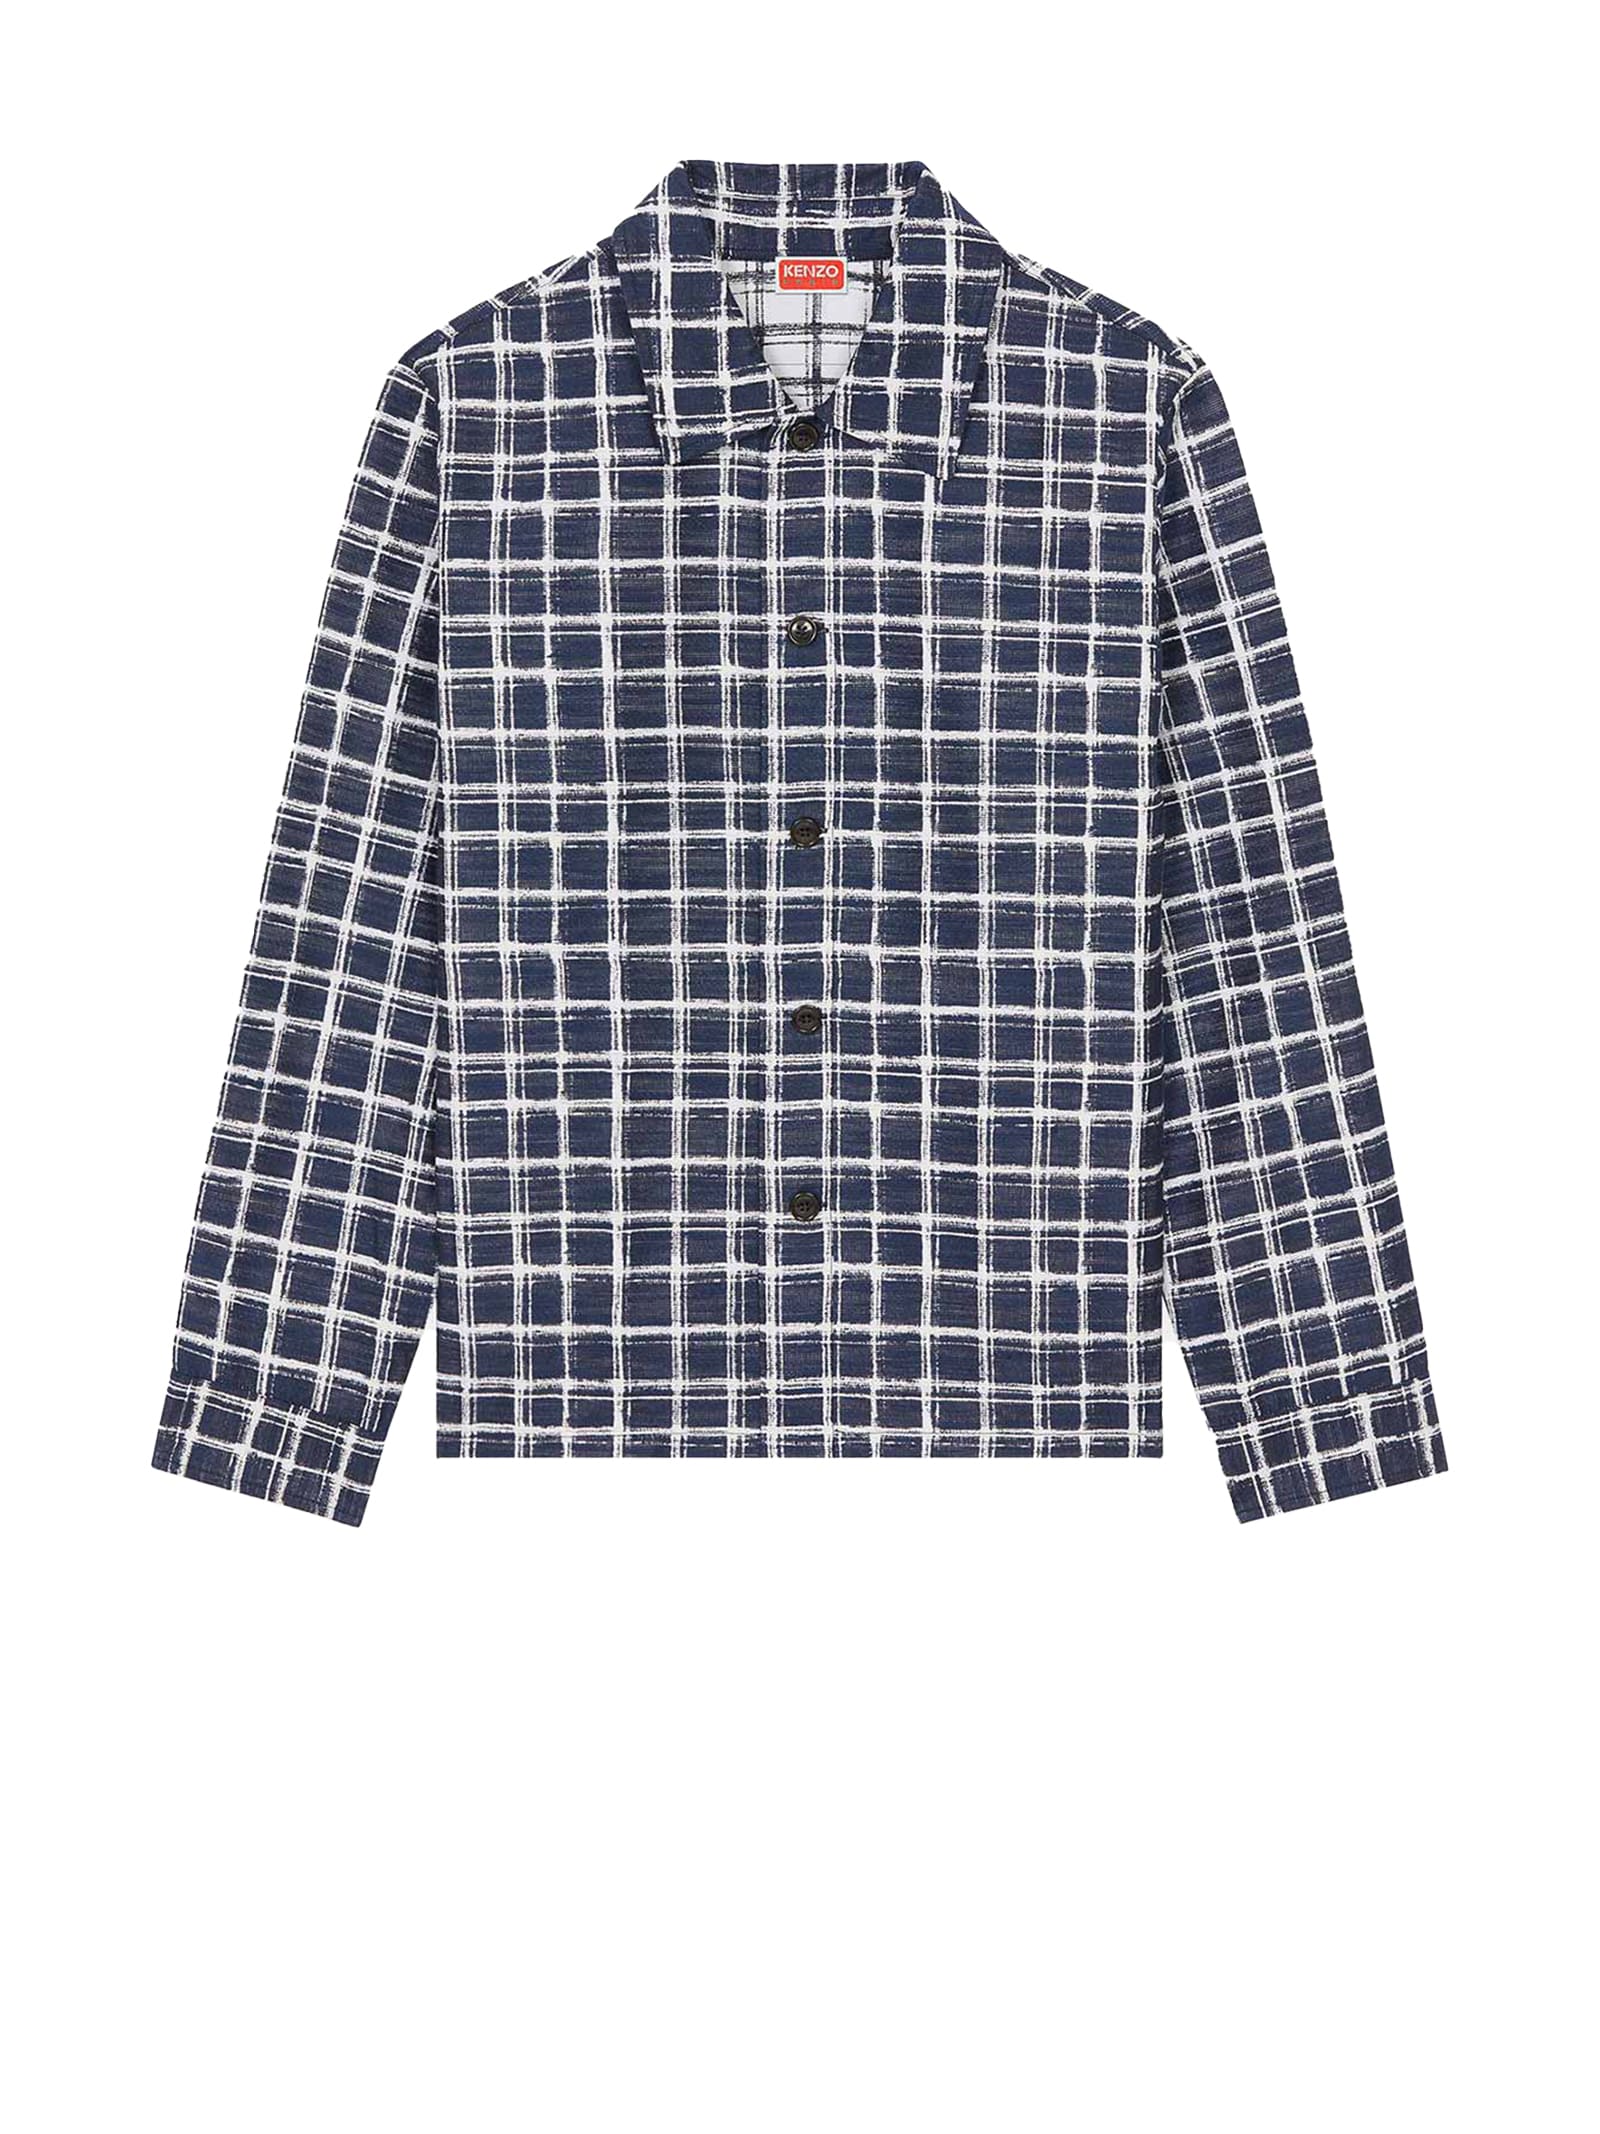 Kenzo Mens Checked Shirt In Midnight Blue